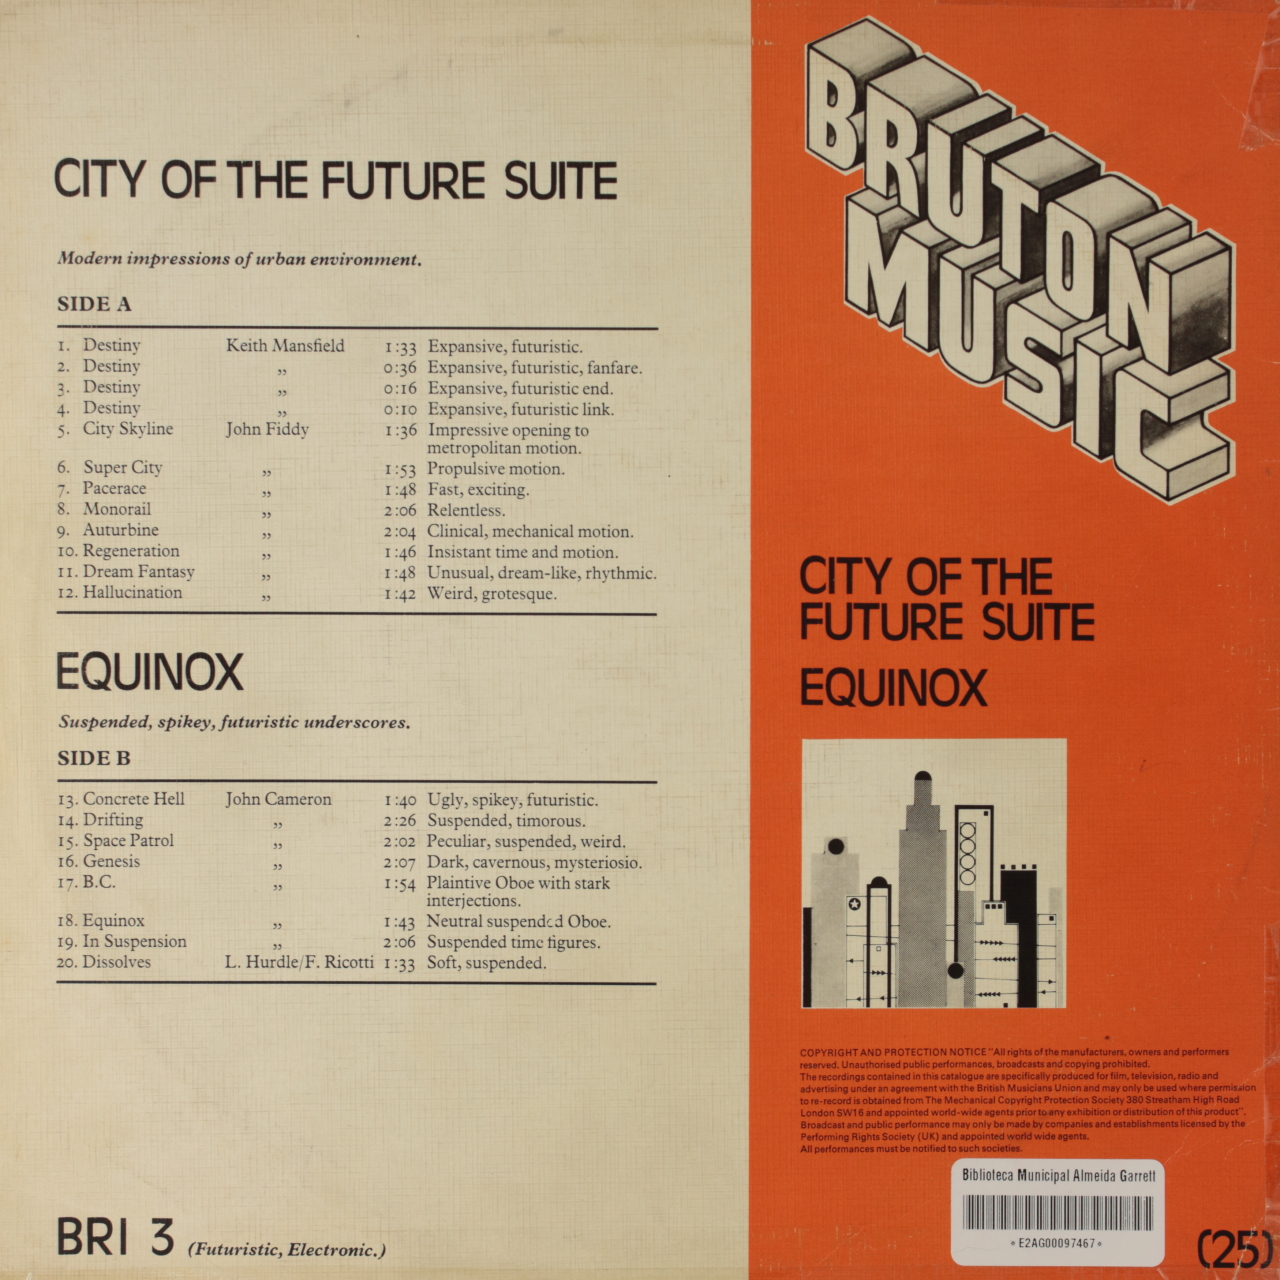 City of the Future Suite